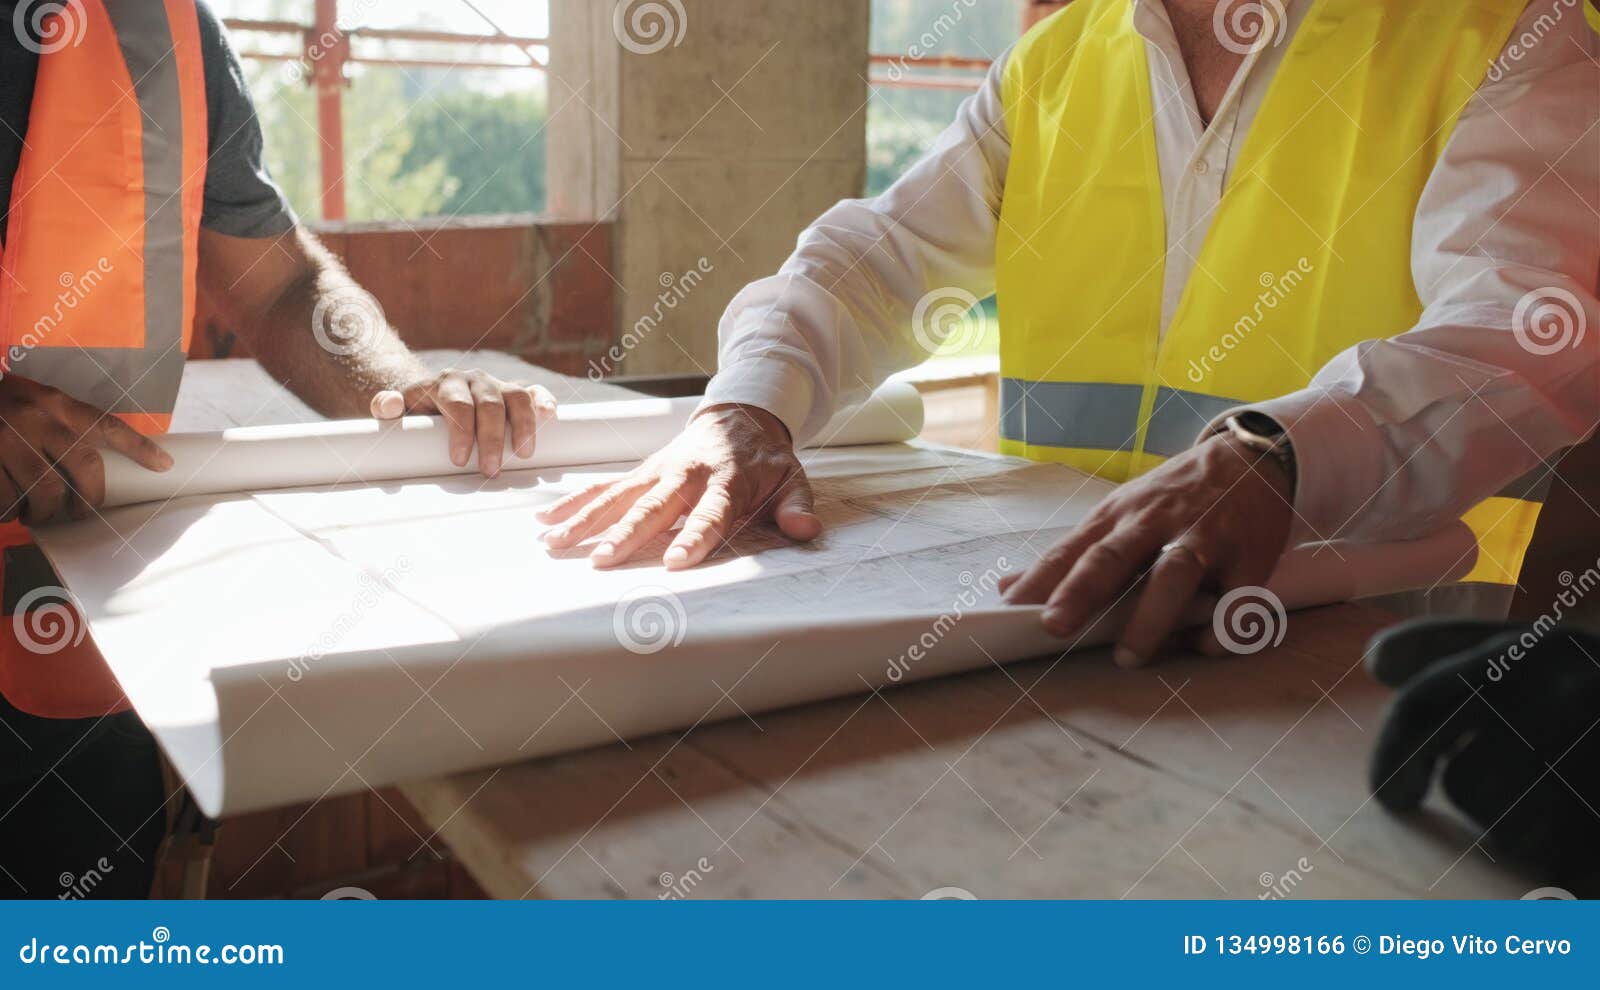 supervisor showing building plans to workers in new house